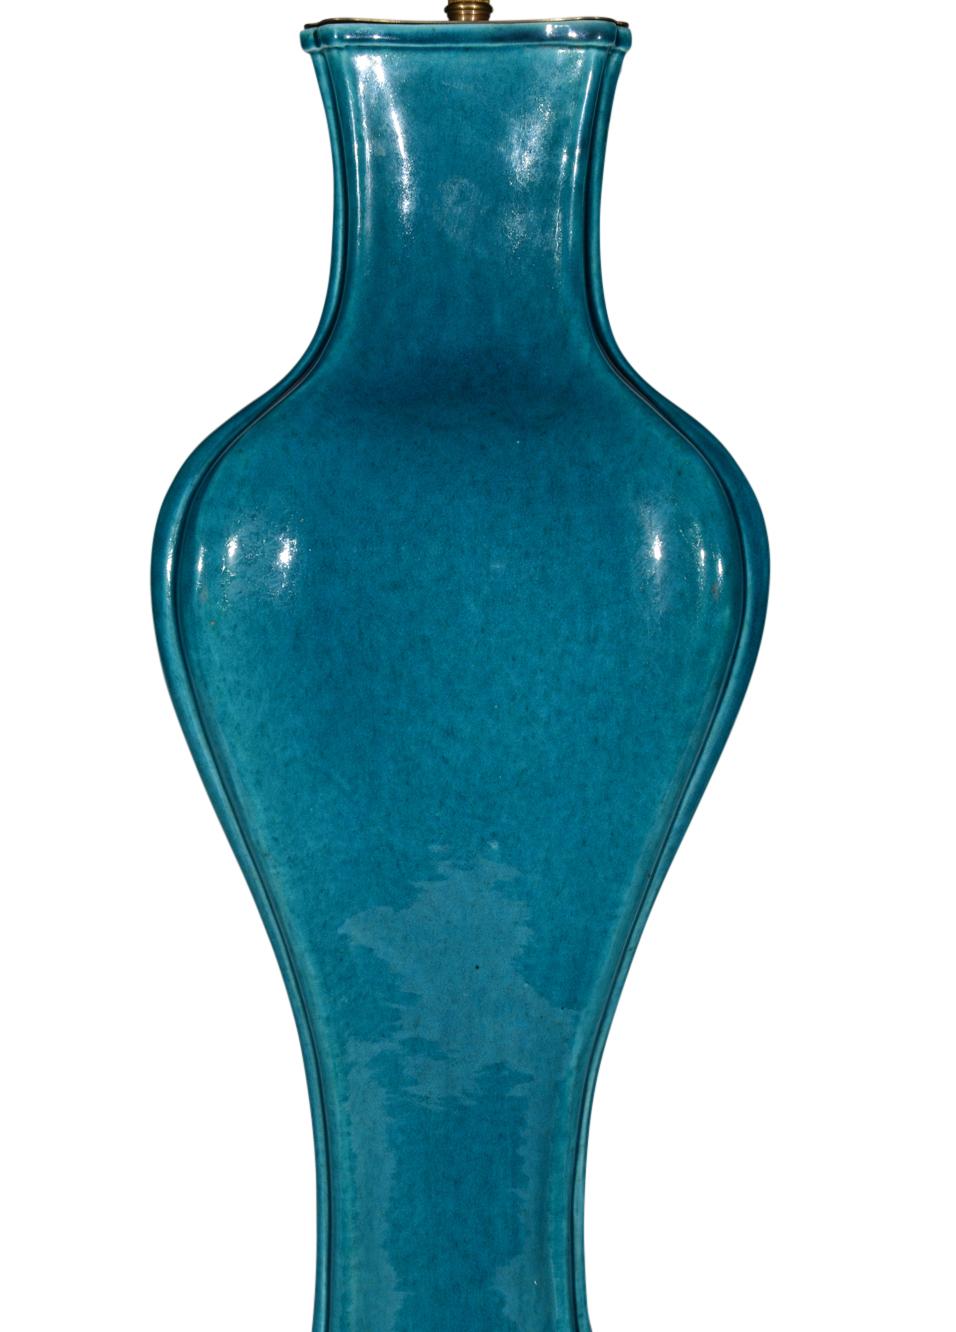 A very fine and unusual elegantly shaped late 19th, early 20th century Chinese deep turquoise glazed baluster vase of rare tapering rectangular panelled moulded form. Now mounted as a lamp with a bespoke fitted hand gilded base.

Height of vase: 20